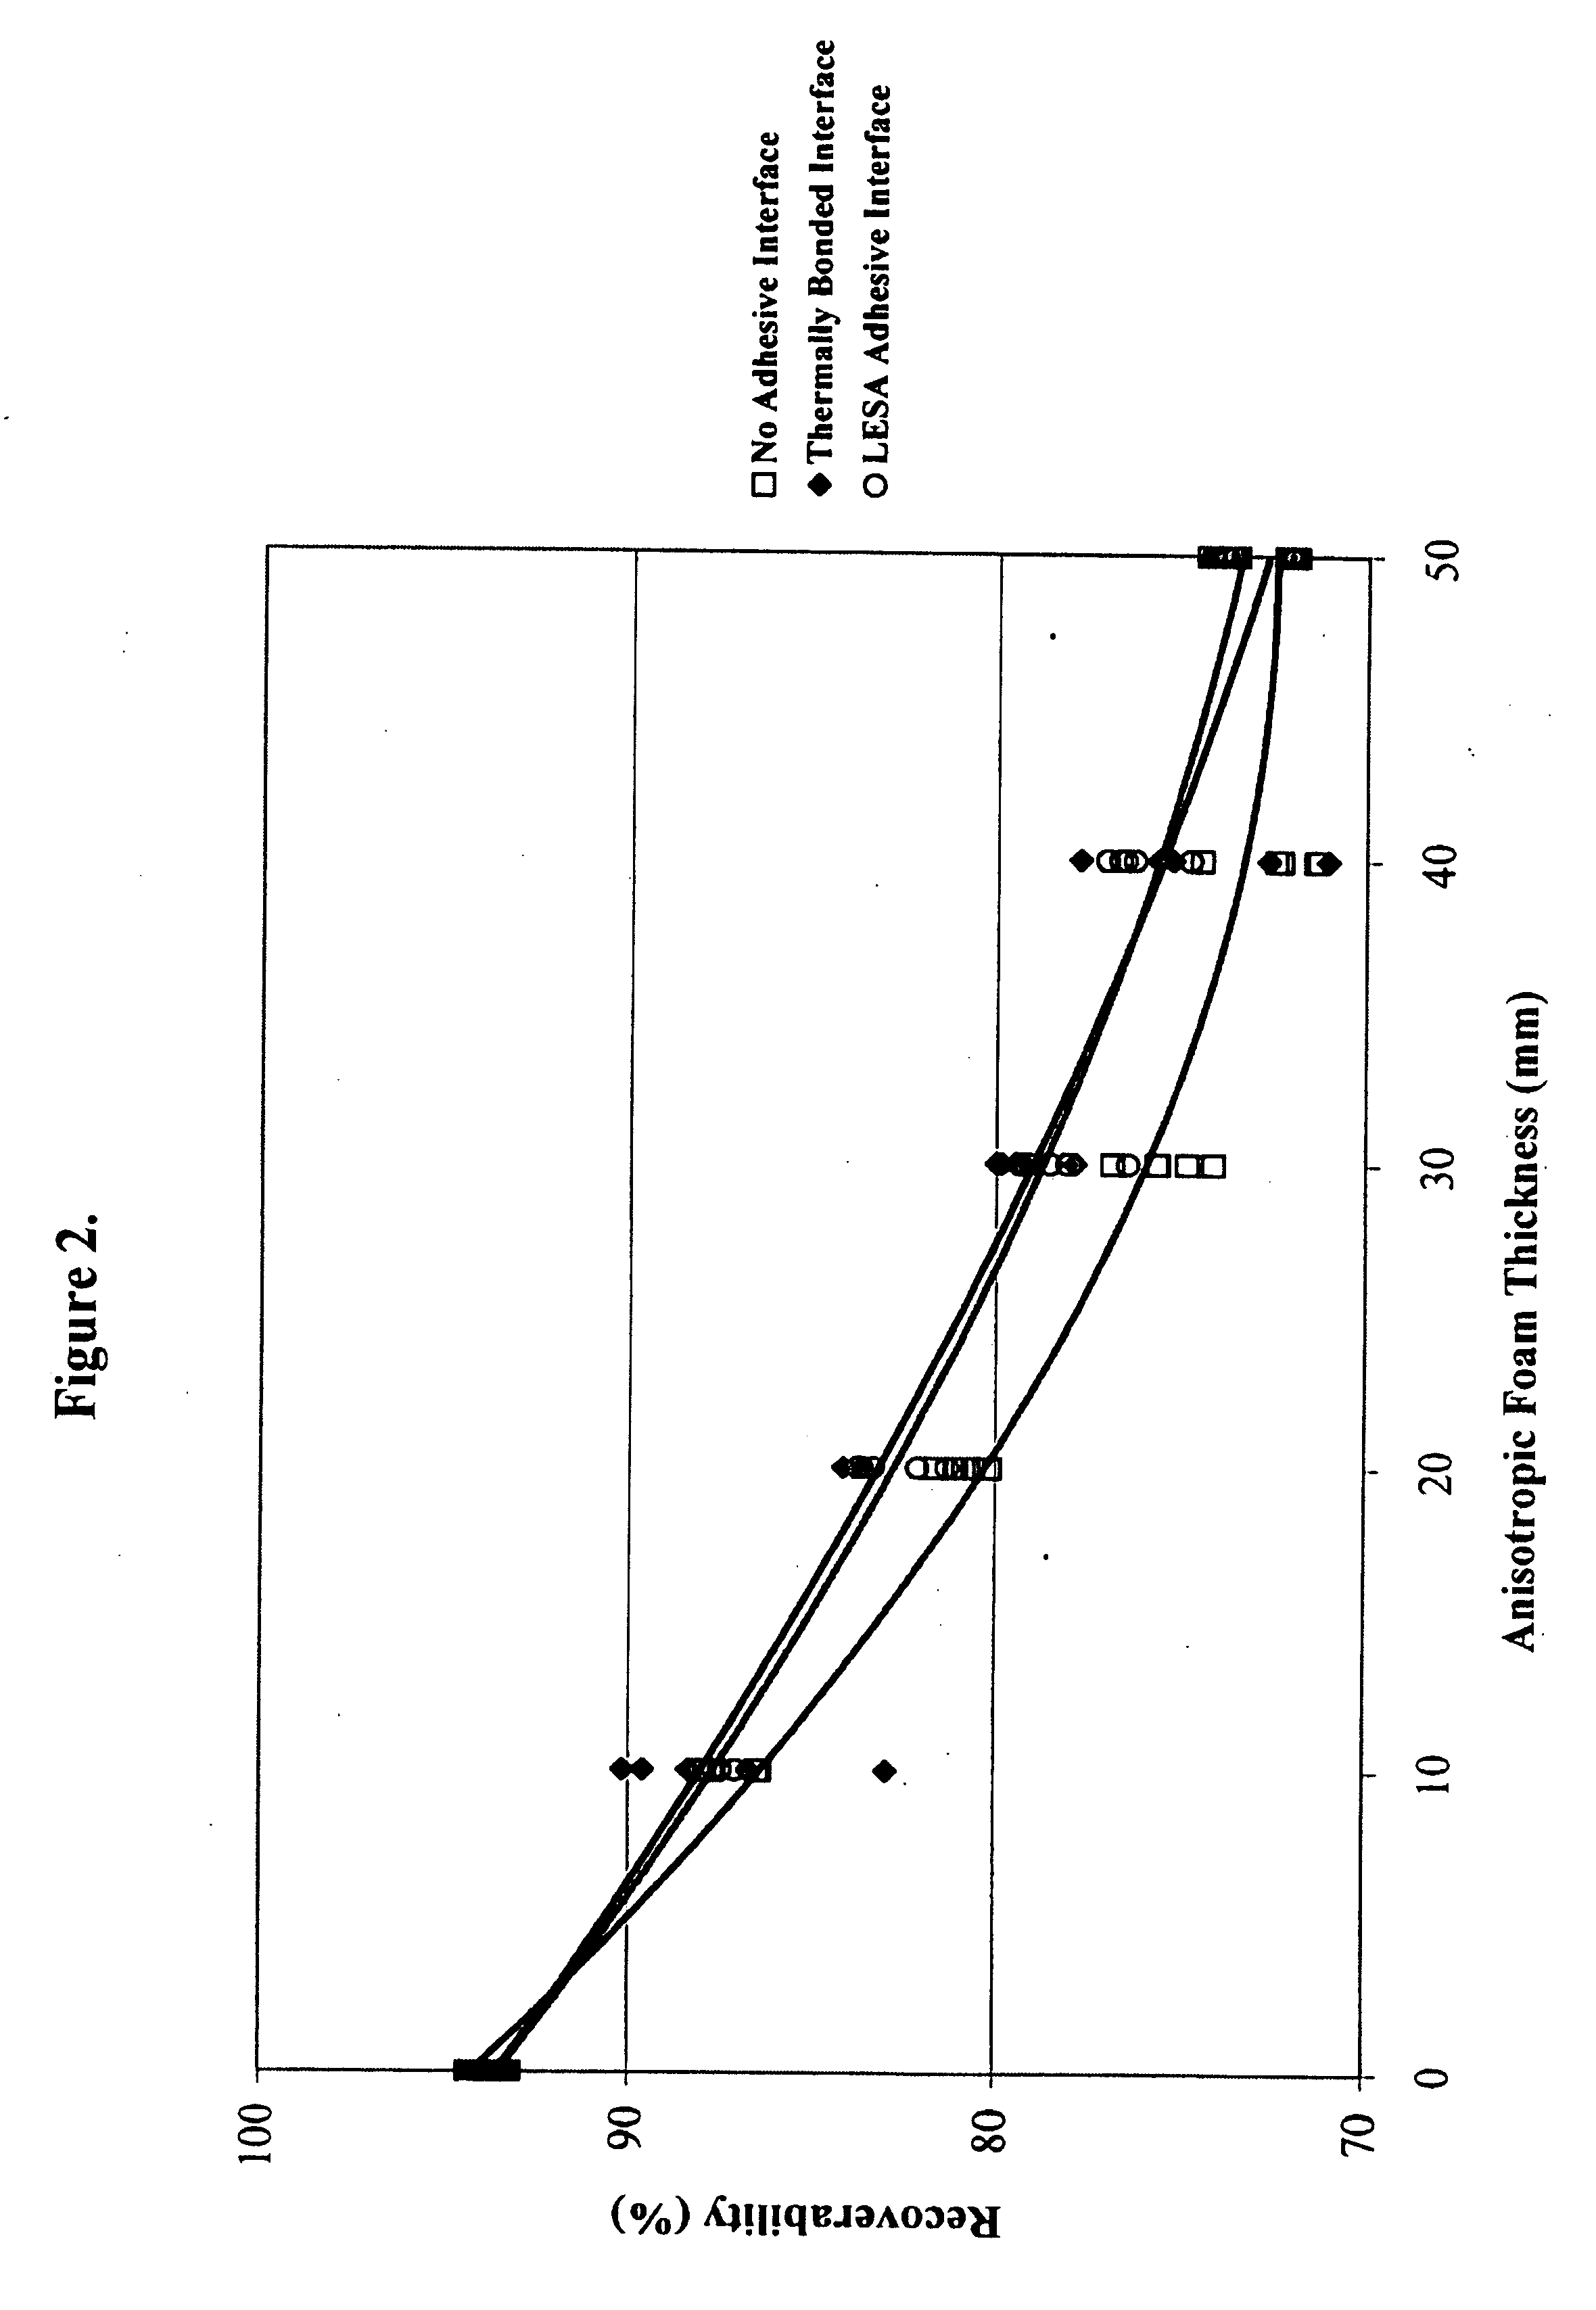 Composite foam structure having an isotropic strength region and anisotropic strength region